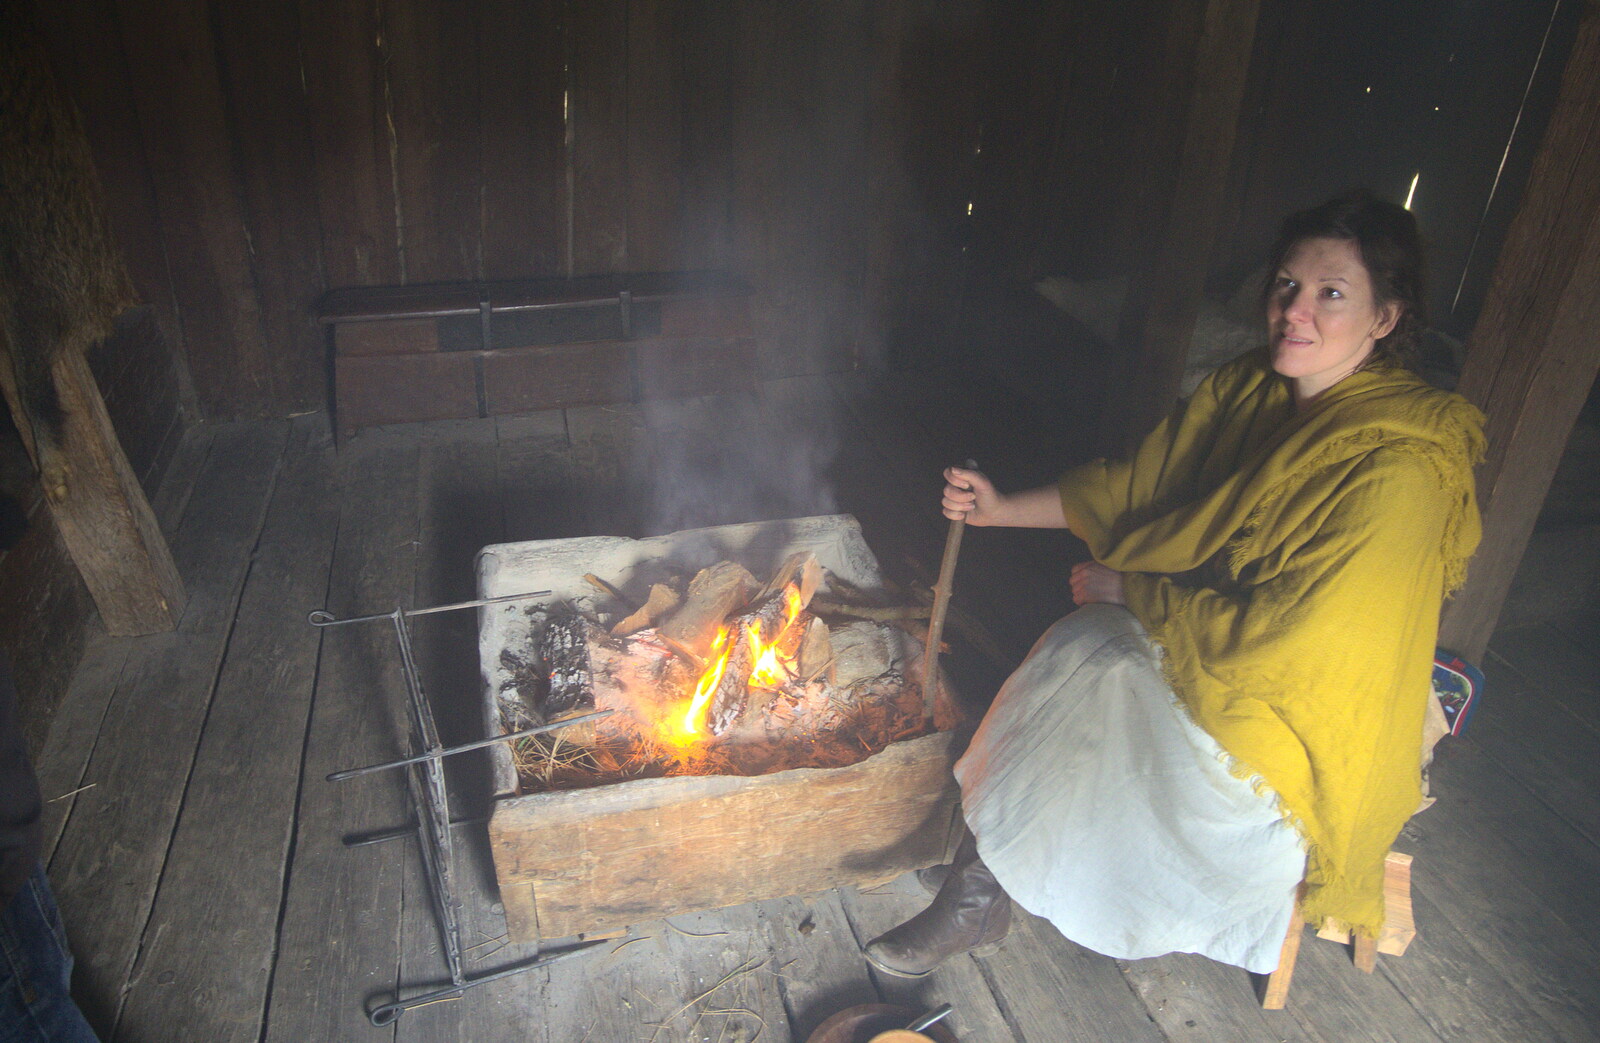 Inside the smoky house, someone is being all Saxon from An Anglo-Saxon Village, West Stow, Suffolk - 19th February 2017